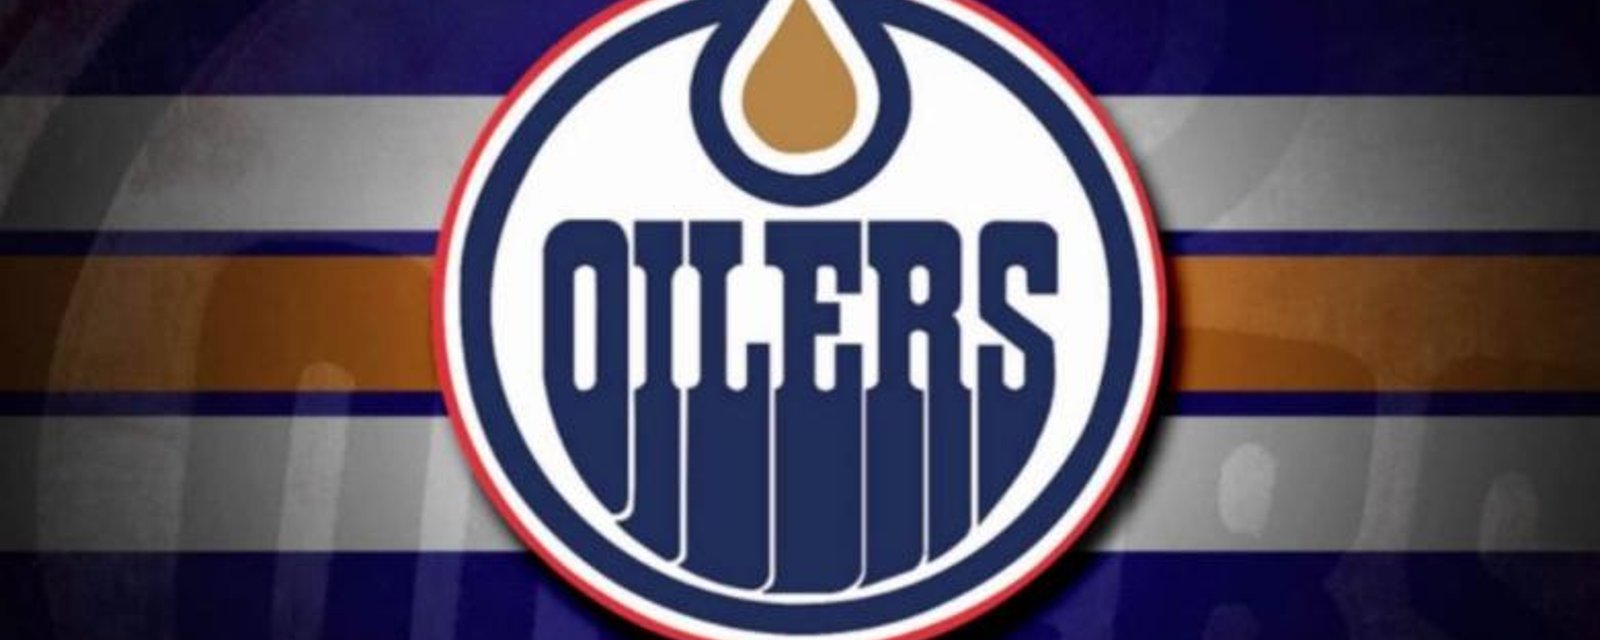 5 Oilers Who Likely Won’t Be Back In 2016-17